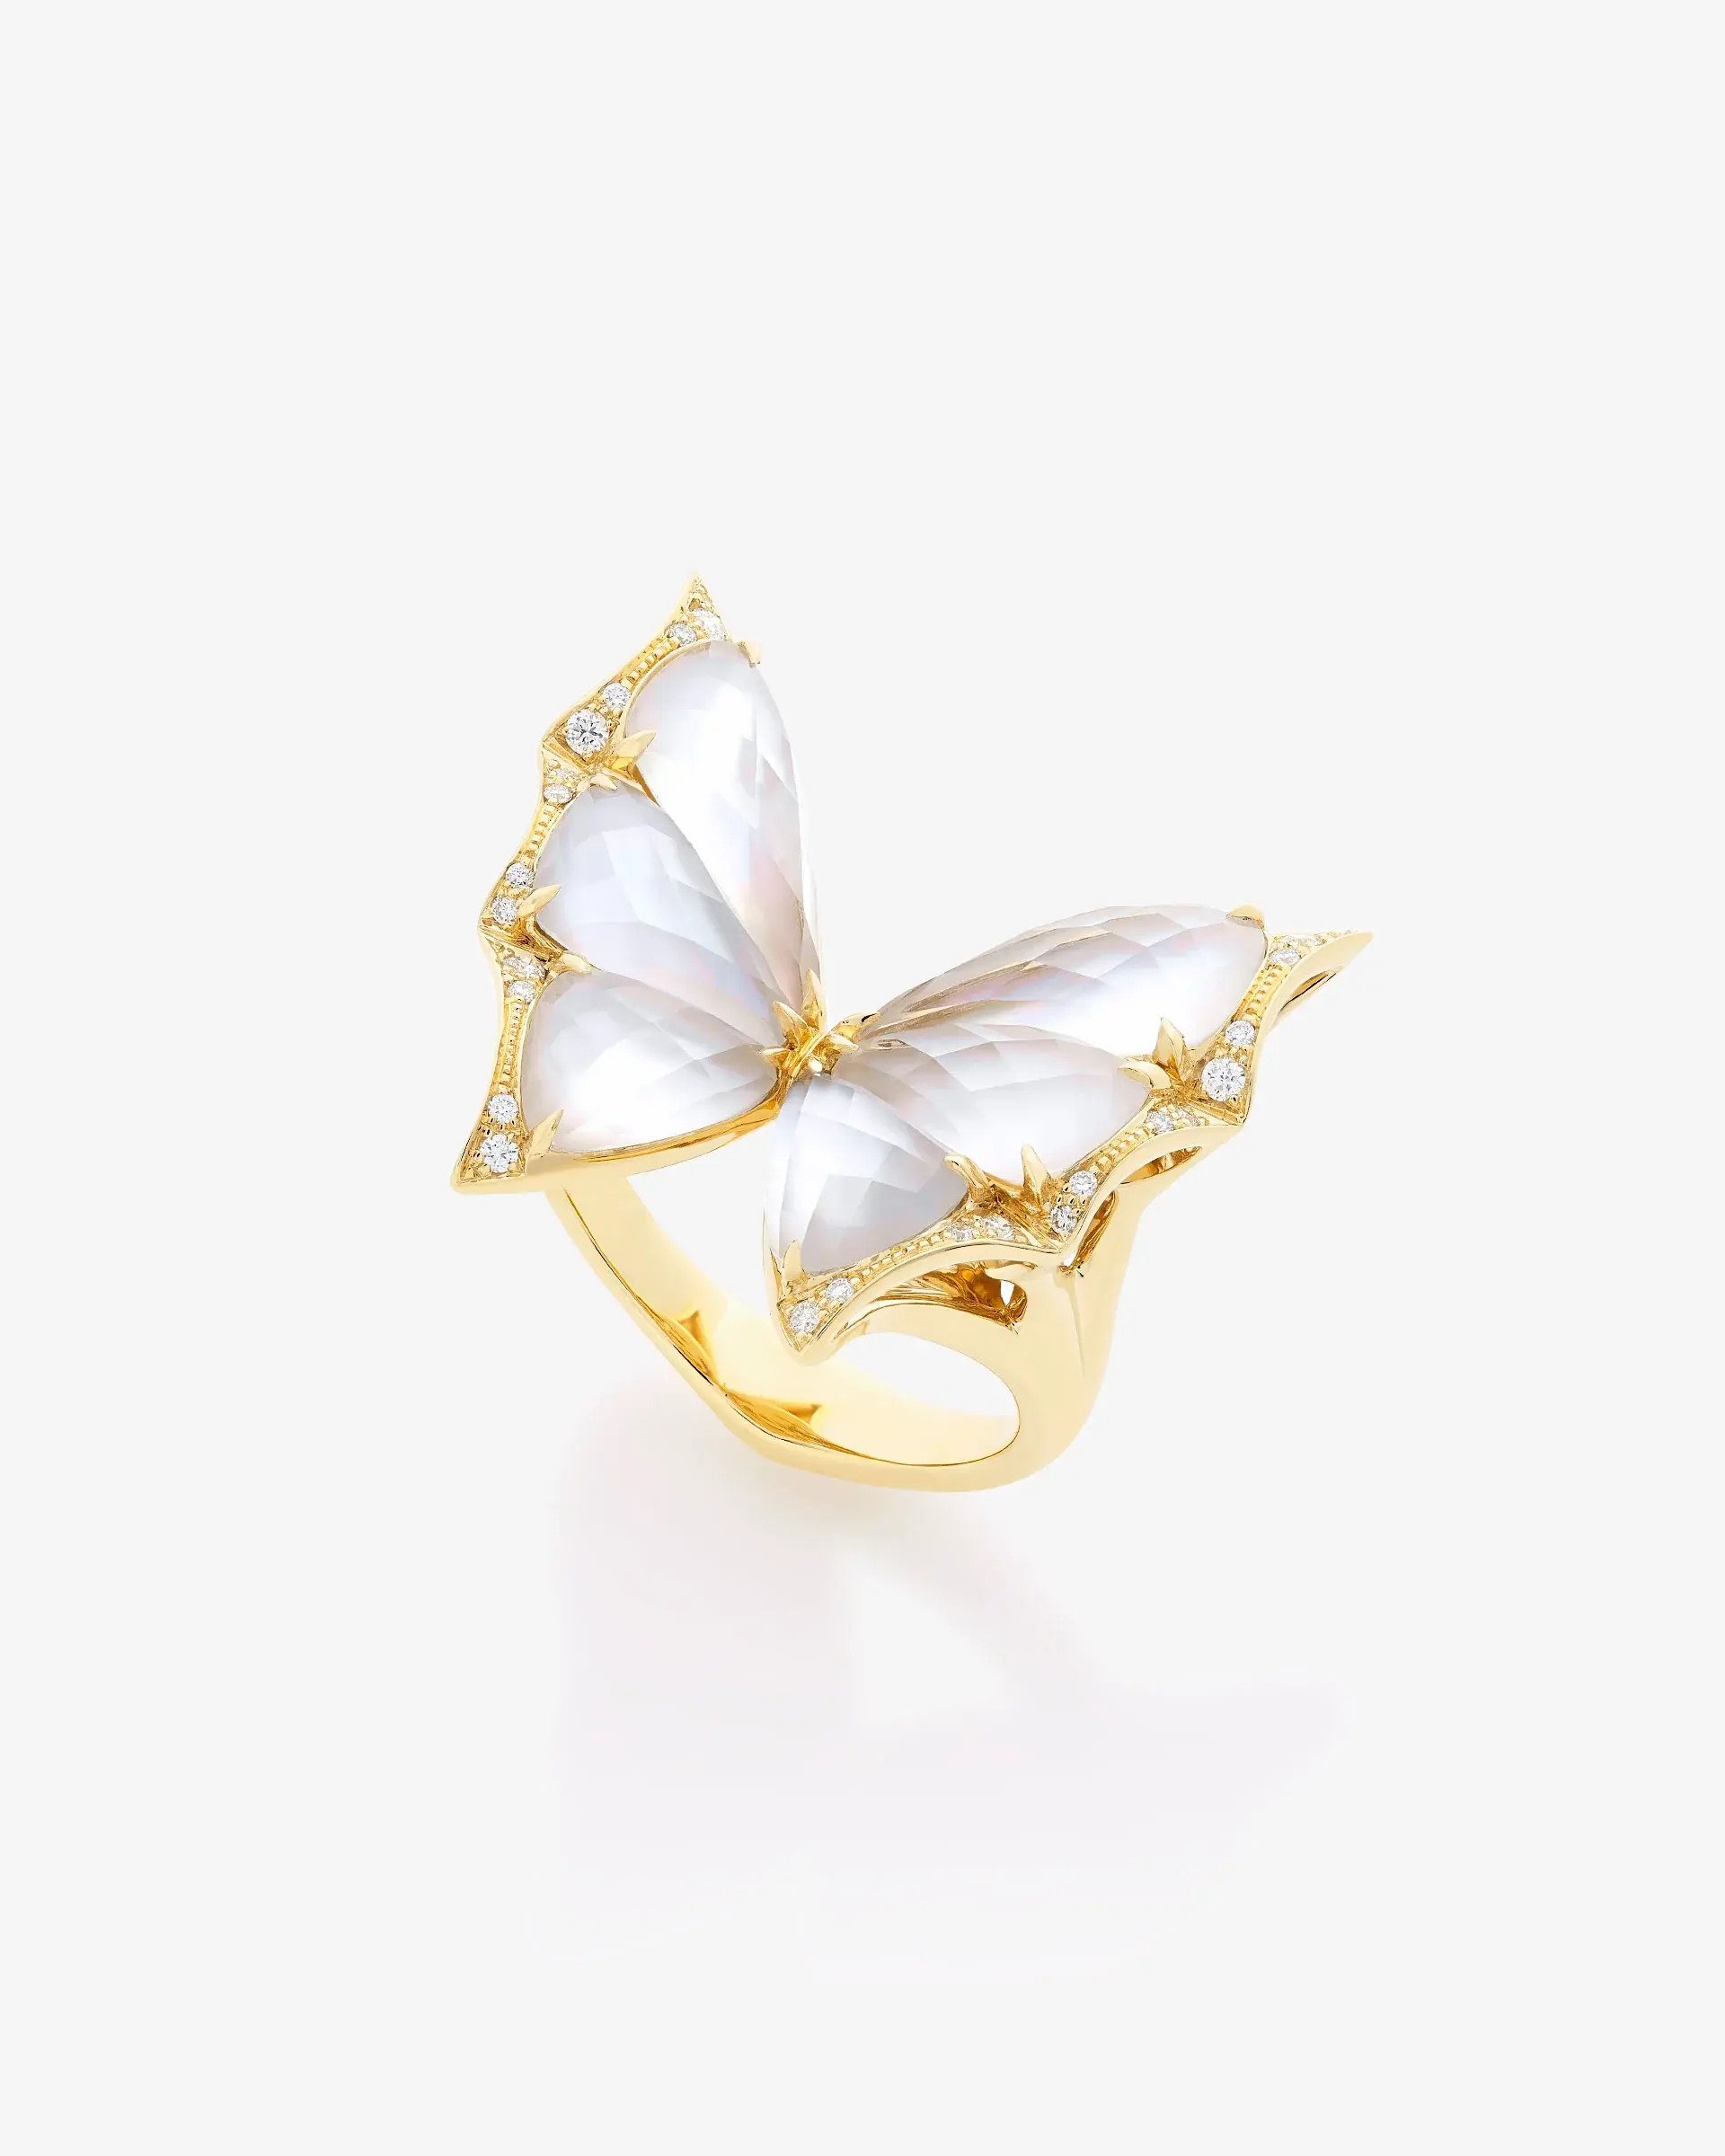 Fly by Night CH2 Small Ring with White Mother of Pearl and White Diamonds in 18kt Yellow Gold - Size 7